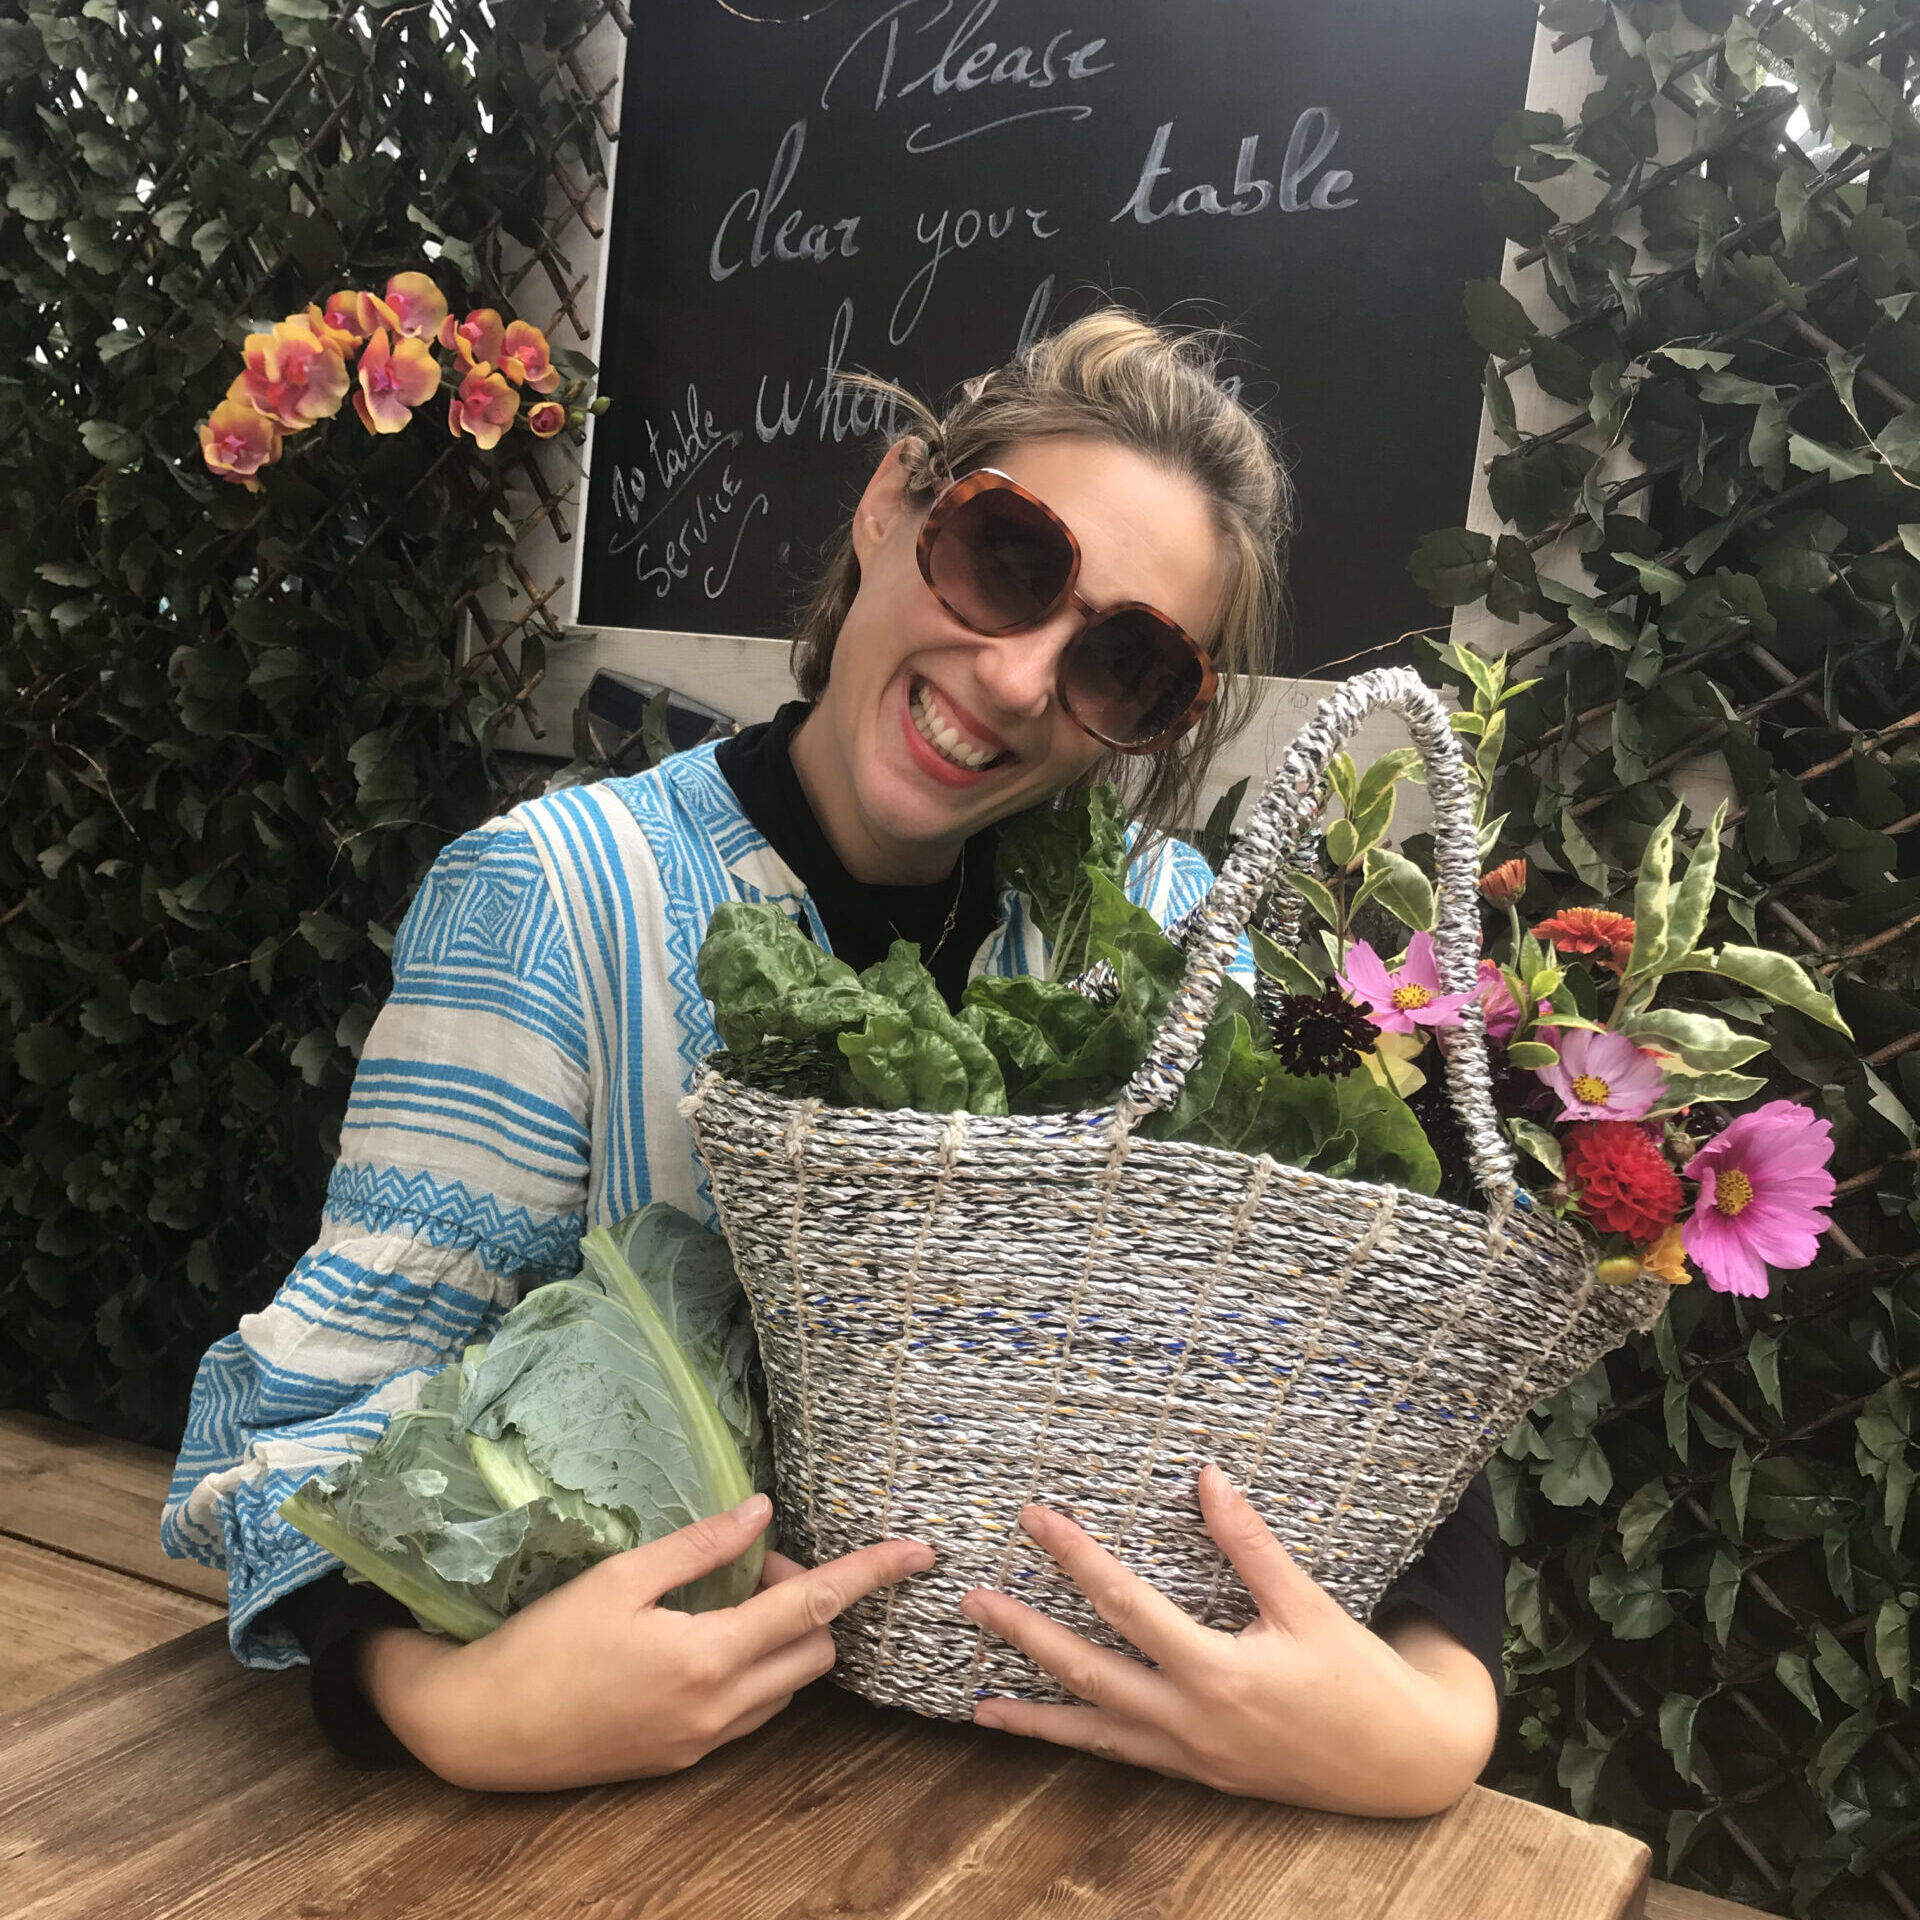 woman in blue dress and sunglasses sitting at a table holding a cauliflower and a basket filled with flowers